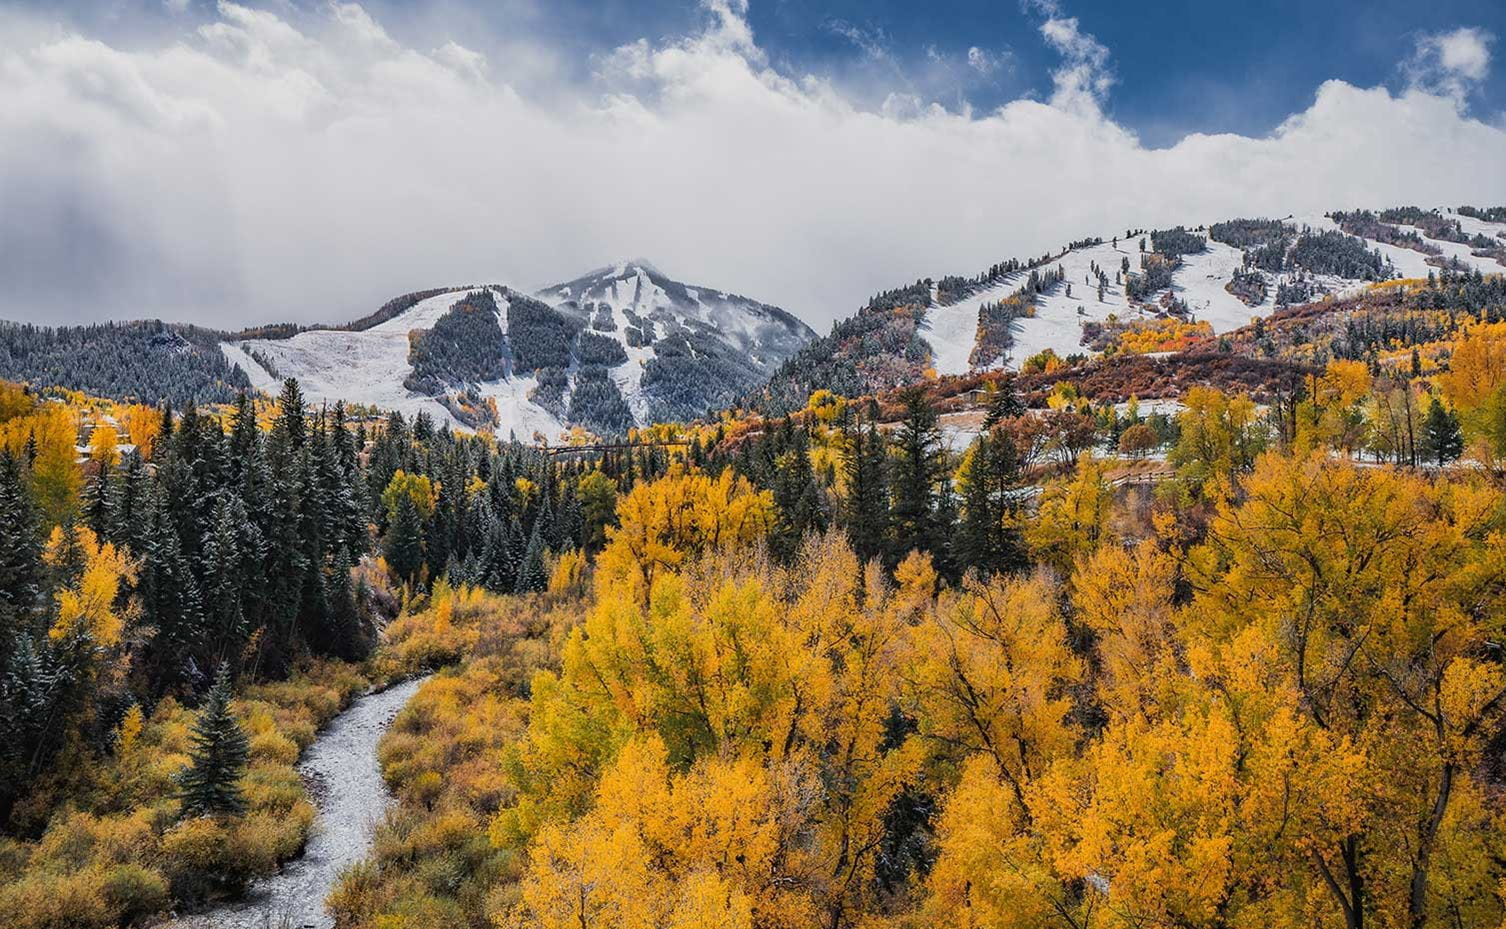 First snow and fall color on Aspen Snowmass